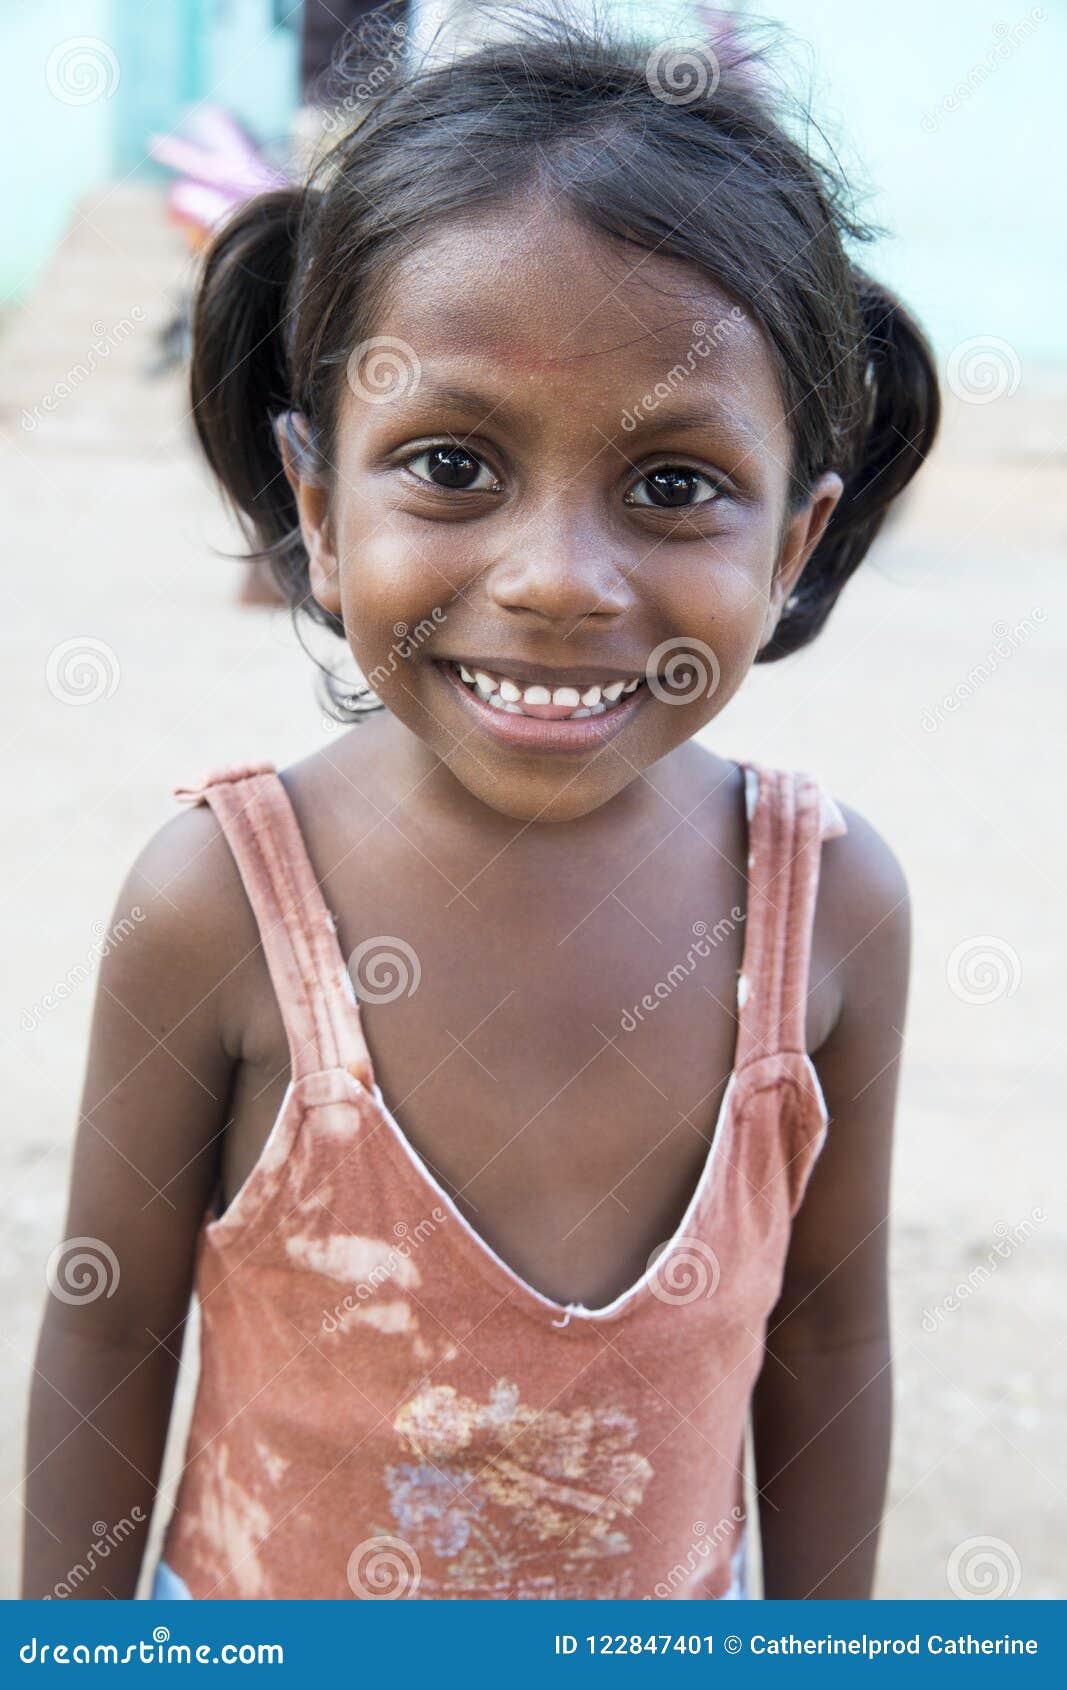 Portrait of Unidentified Indian Poor Kid Girl Child is Smiling Outddor in  the Street Editorial Photo - Image of ethnic, happiness: 122847401